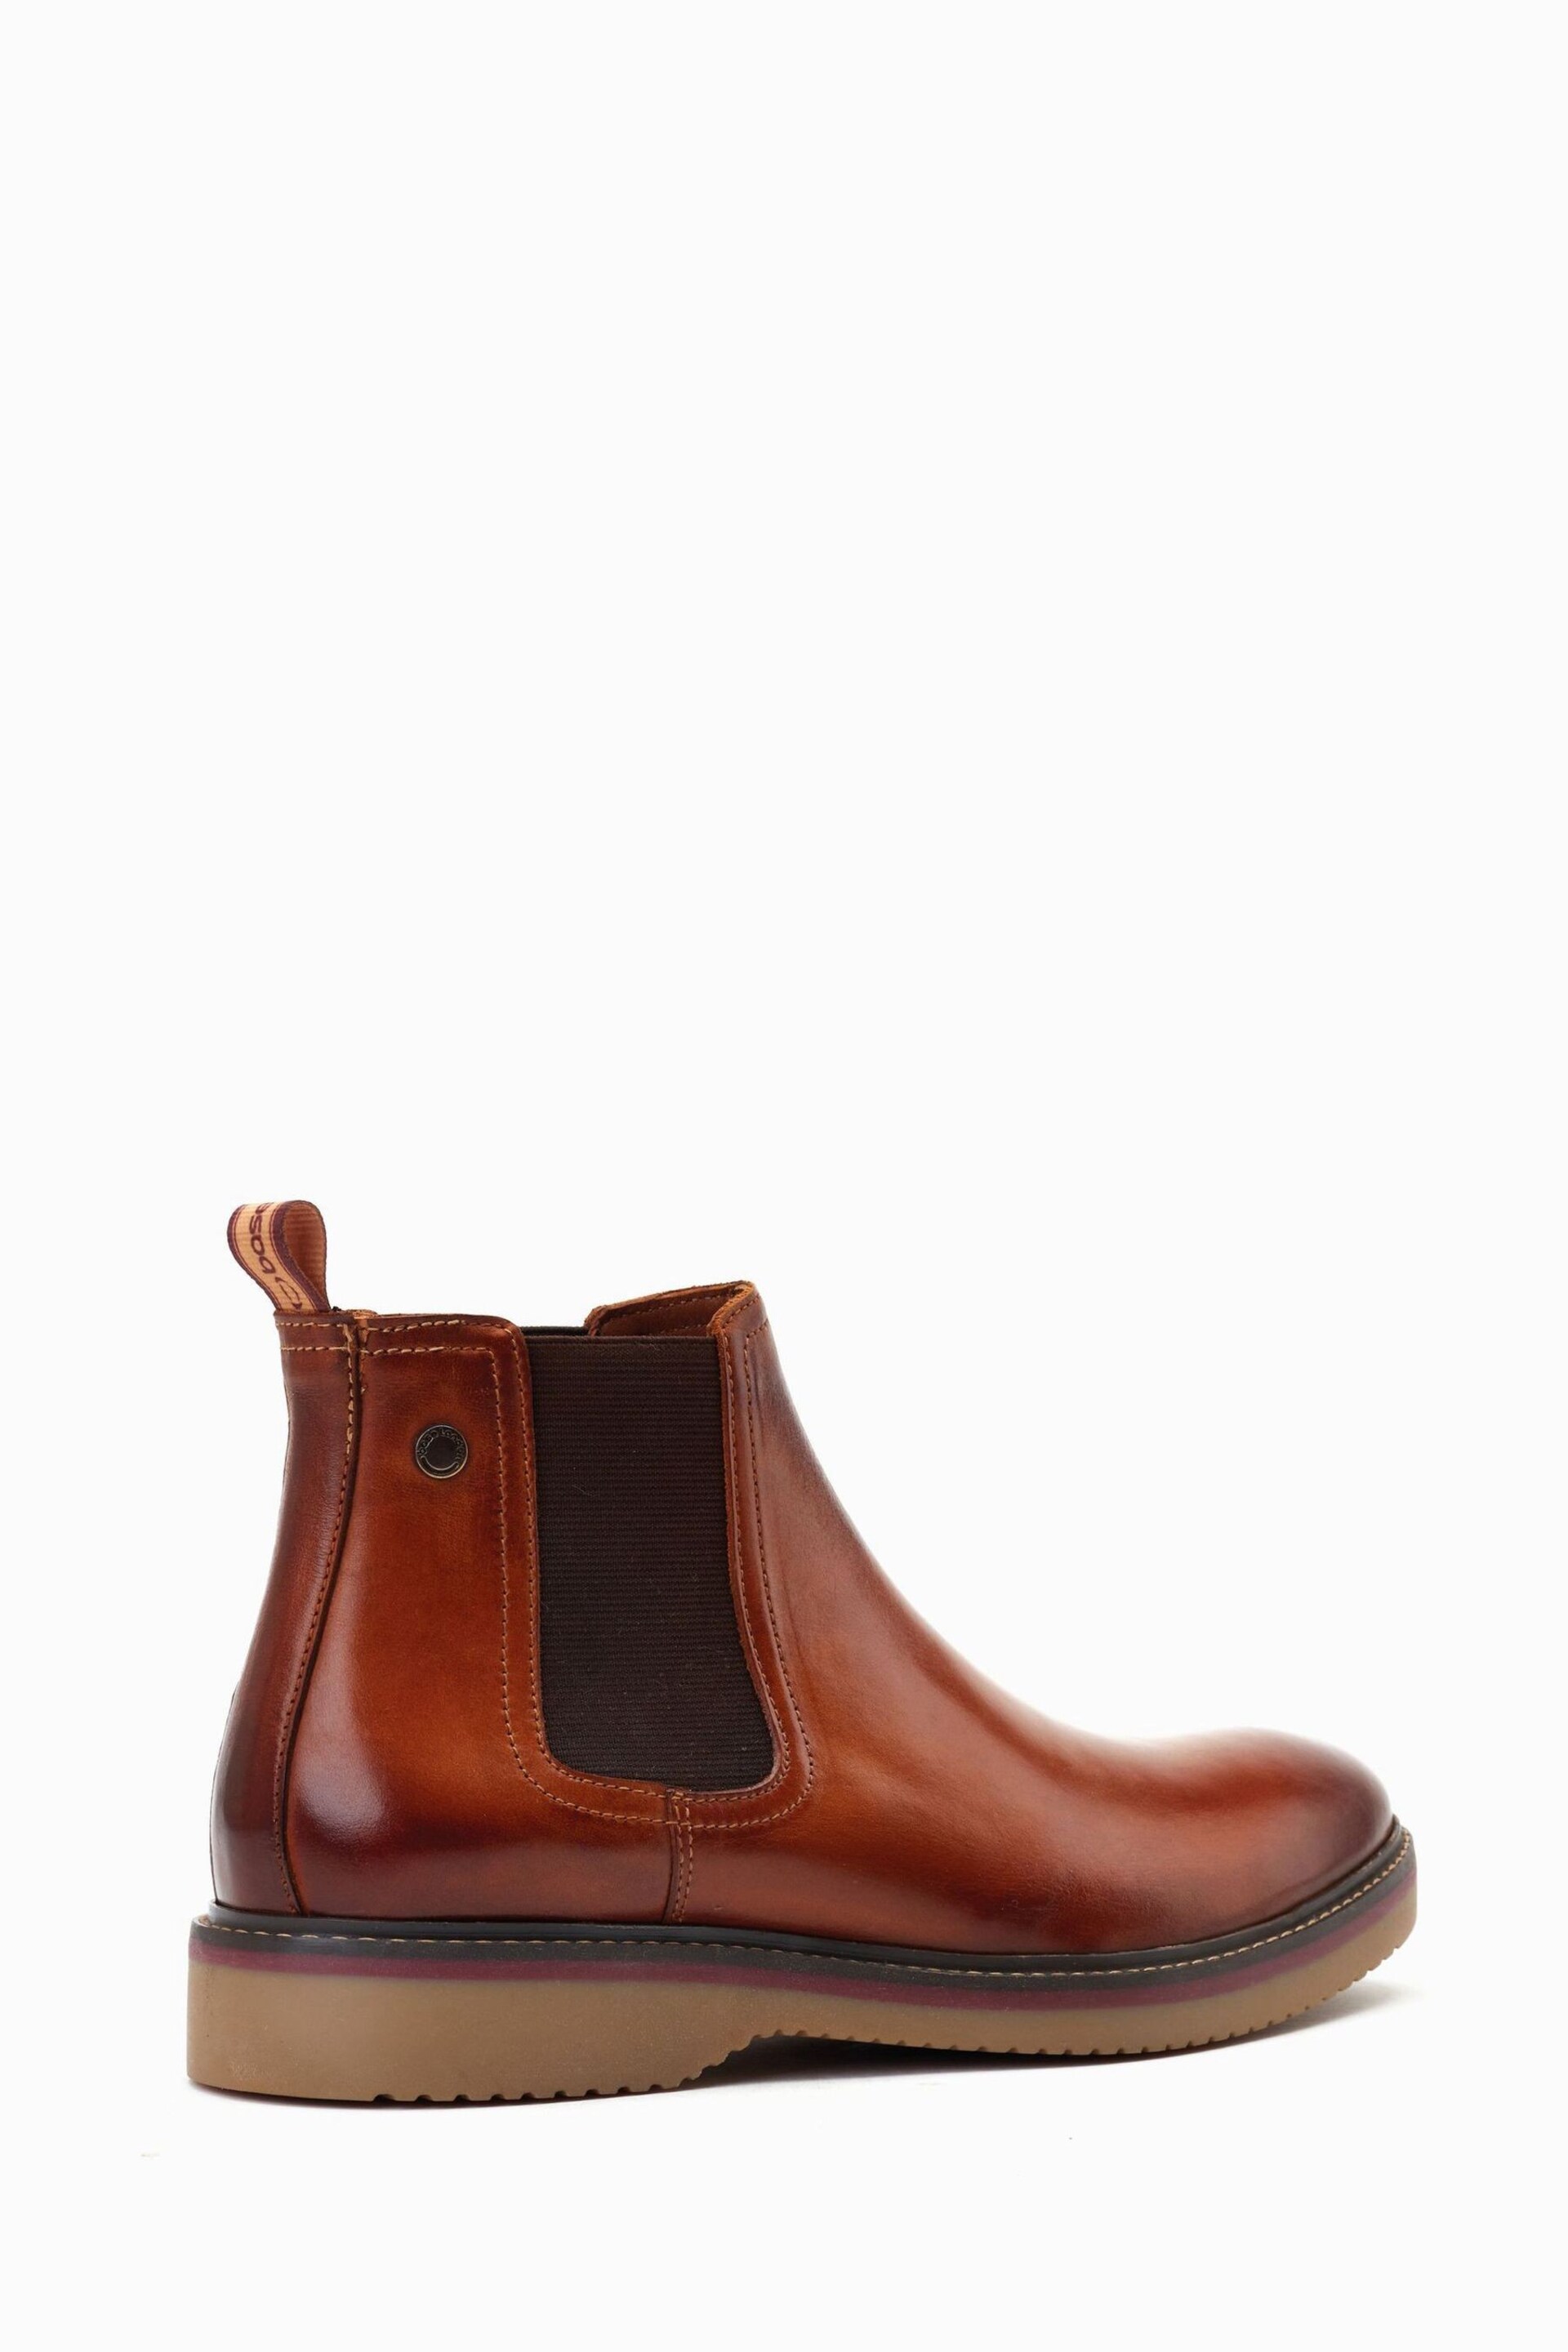 Base London Natural Hooper Pull On Chelsea Boots - Image 3 of 6